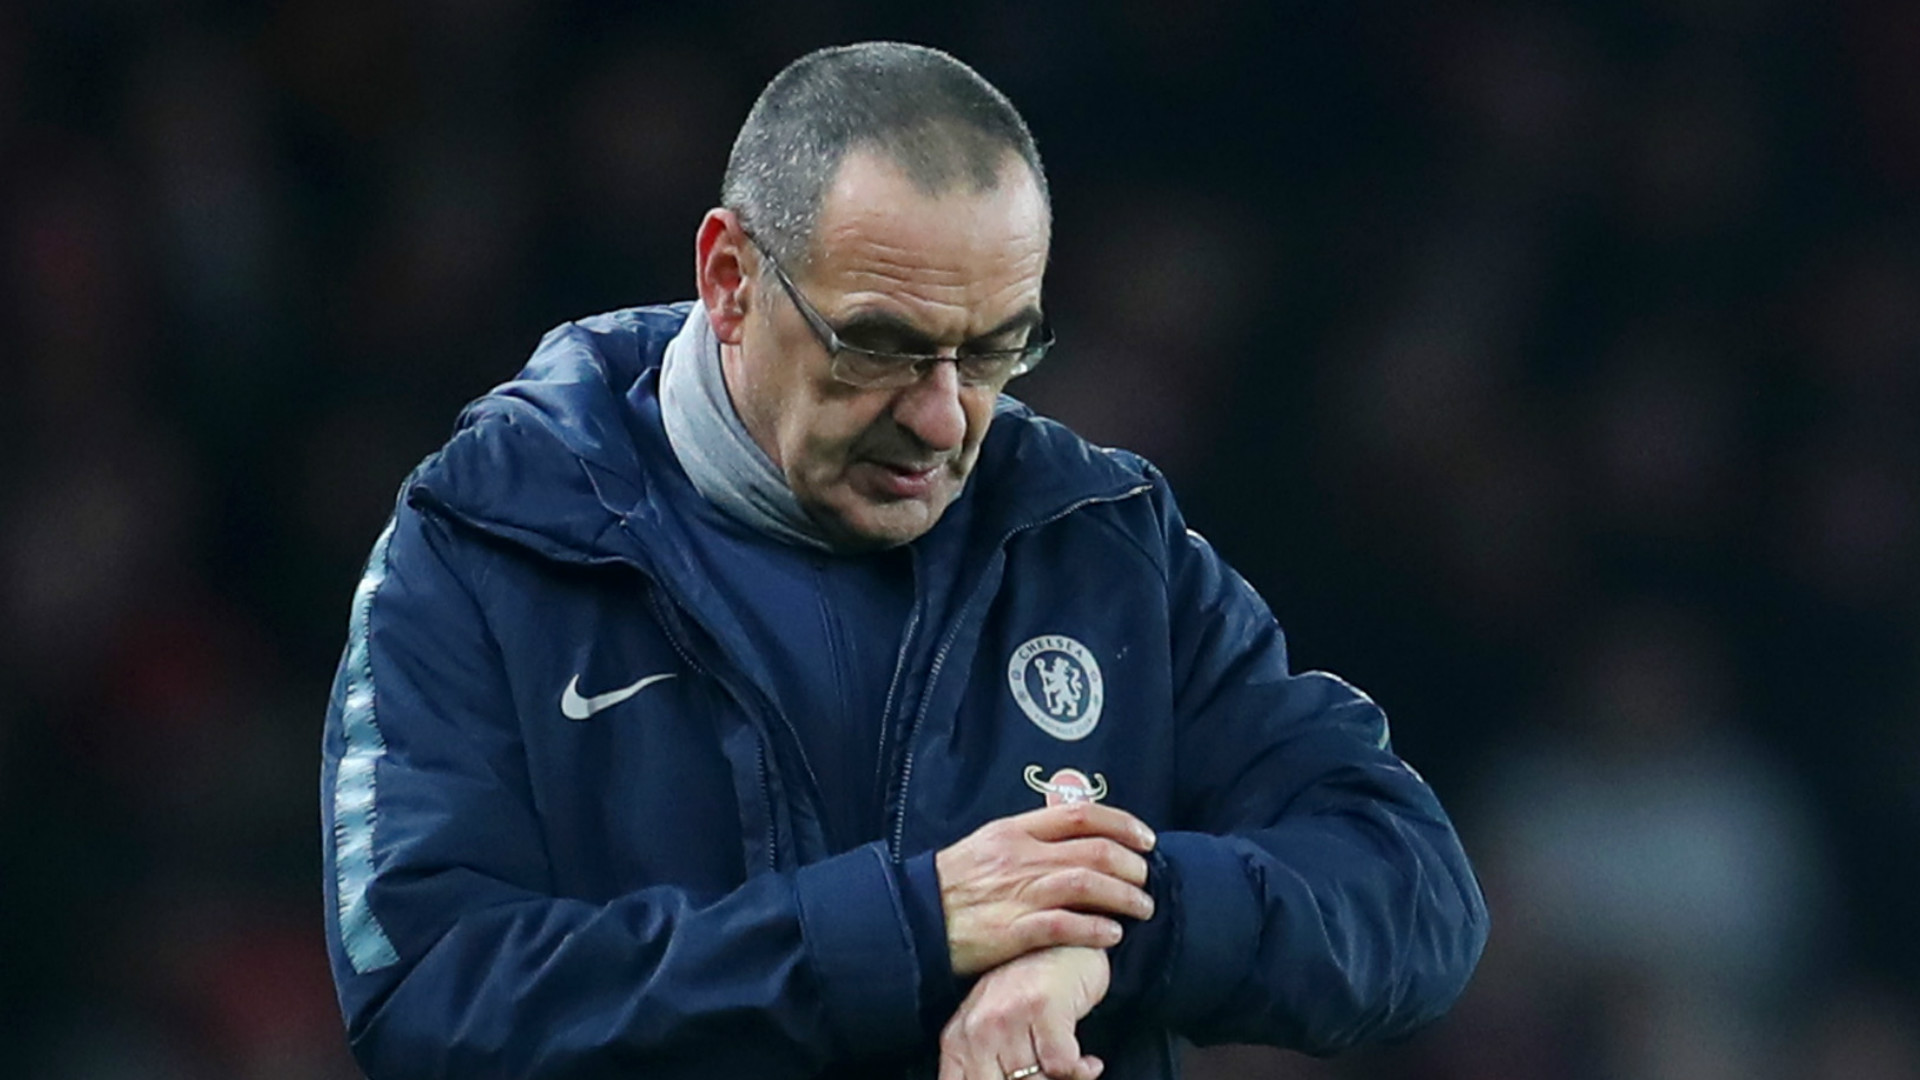 Official soon: Chelsea decide on risky new manager appointment as Maurizio Sarri nears sack and potential Serie A return - Bóng Đá